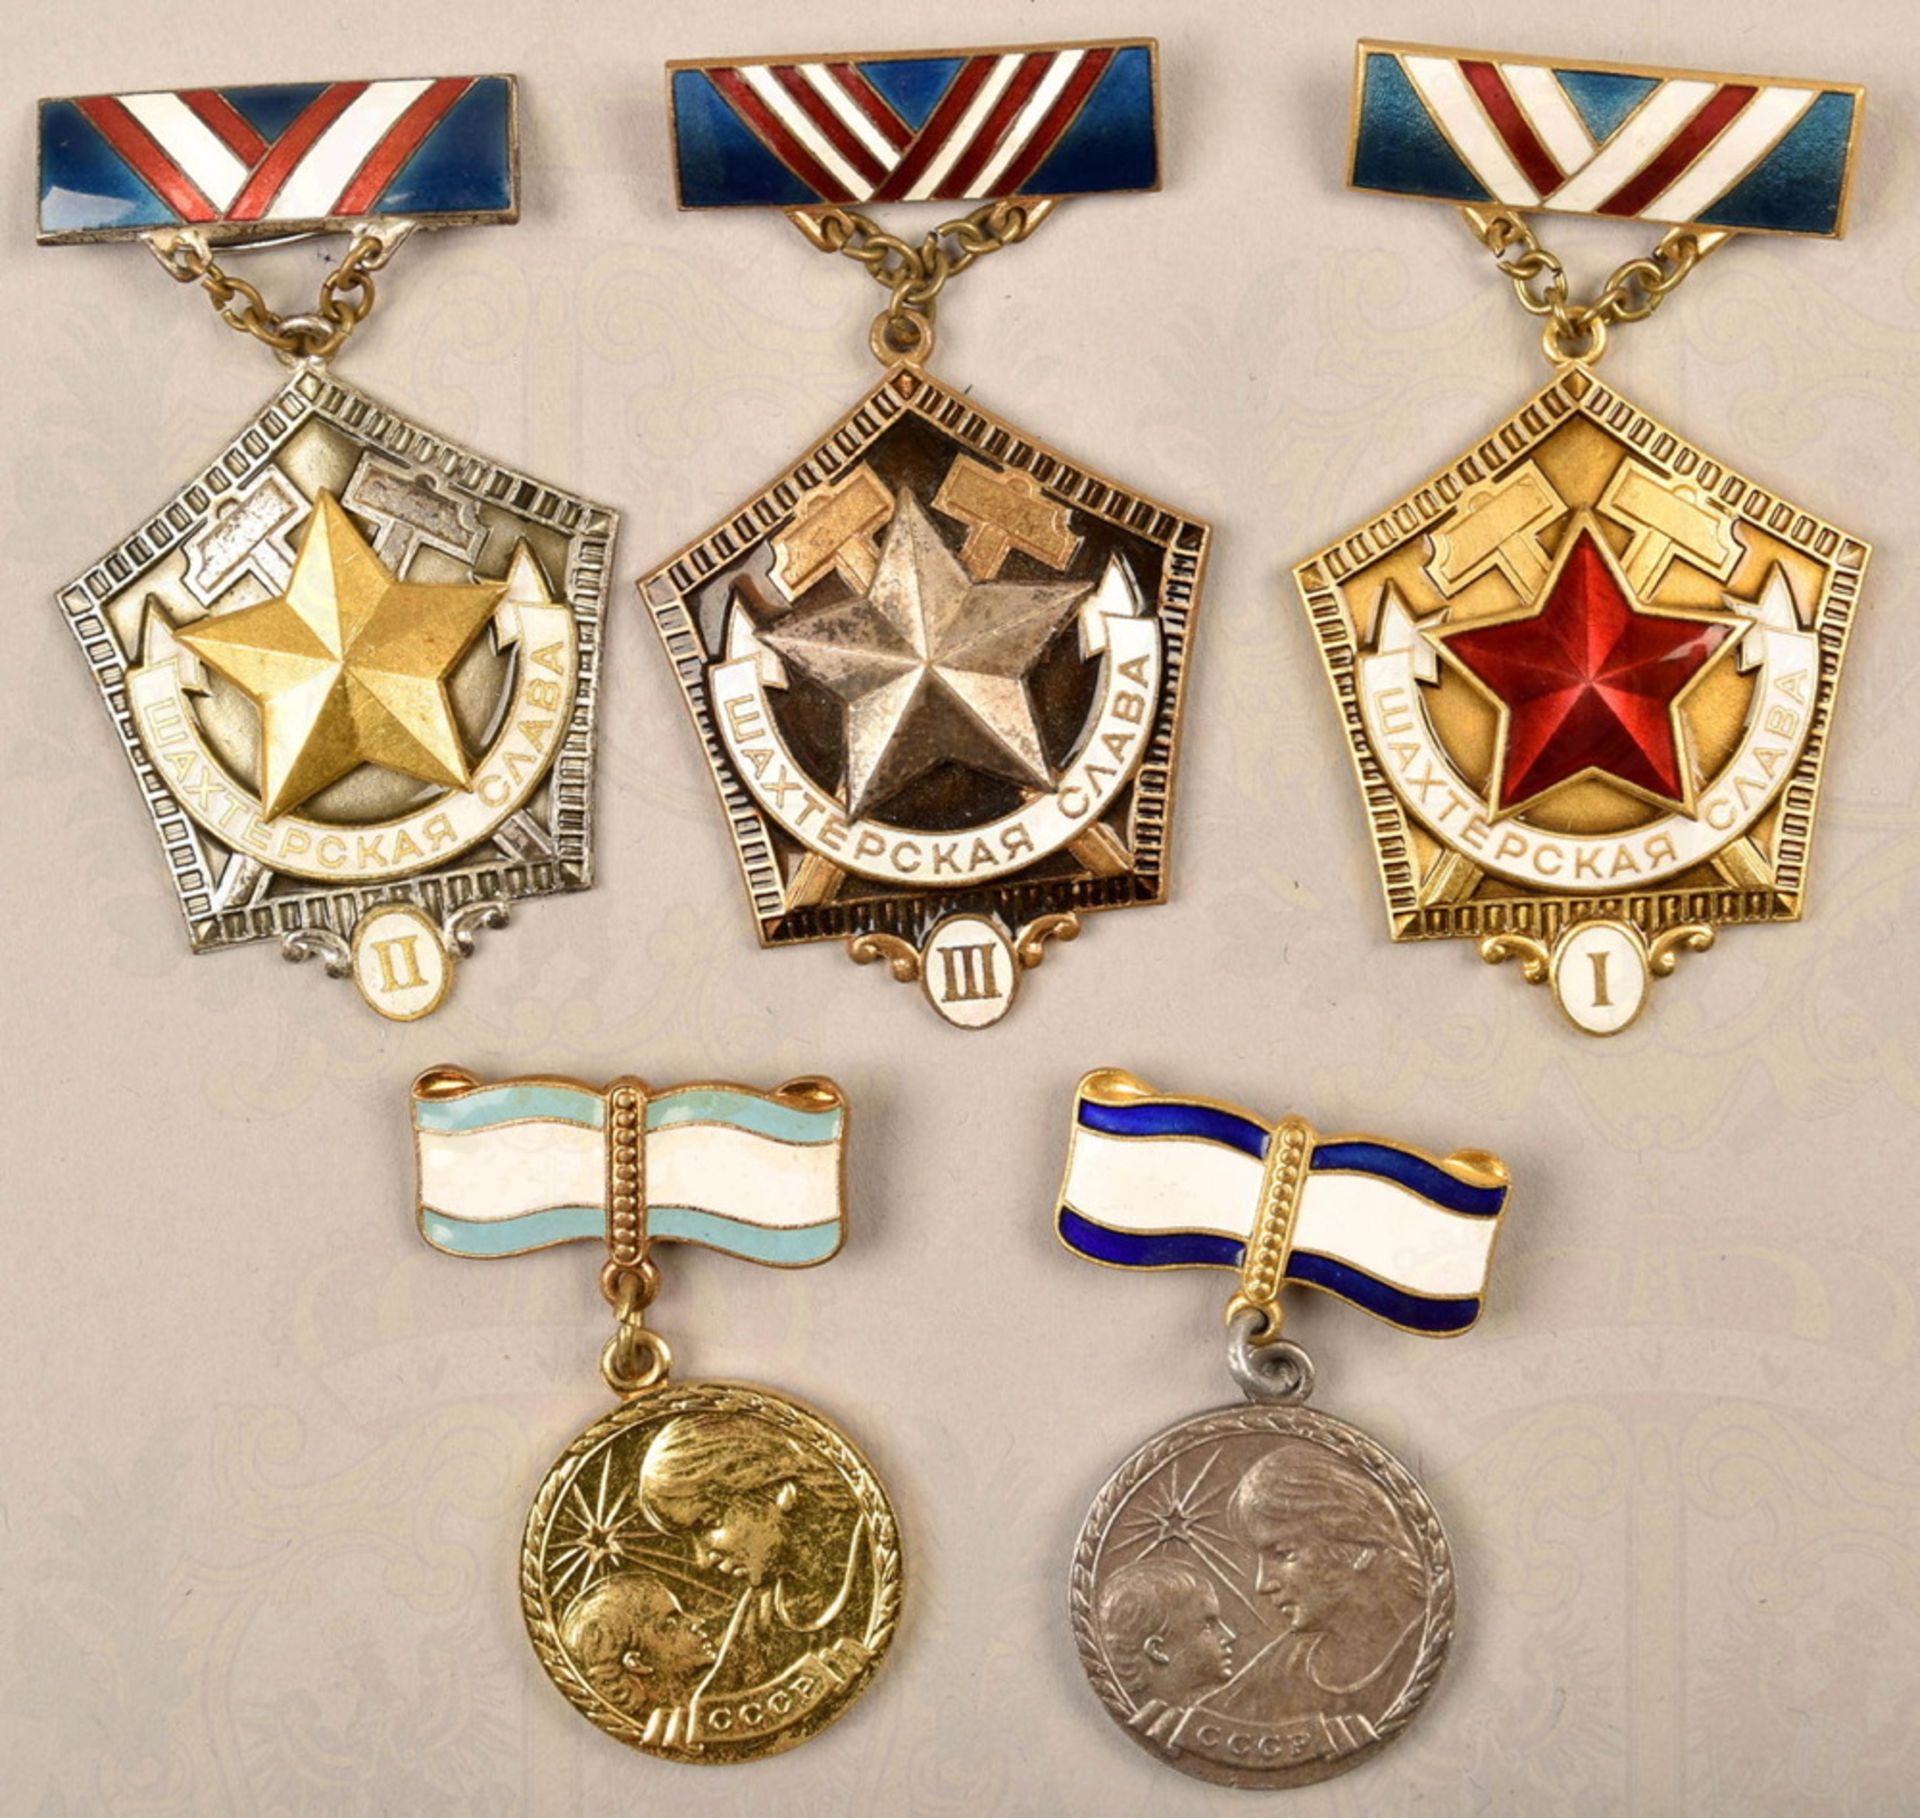 5 Soviet awards incl. set of 3 medals for miners